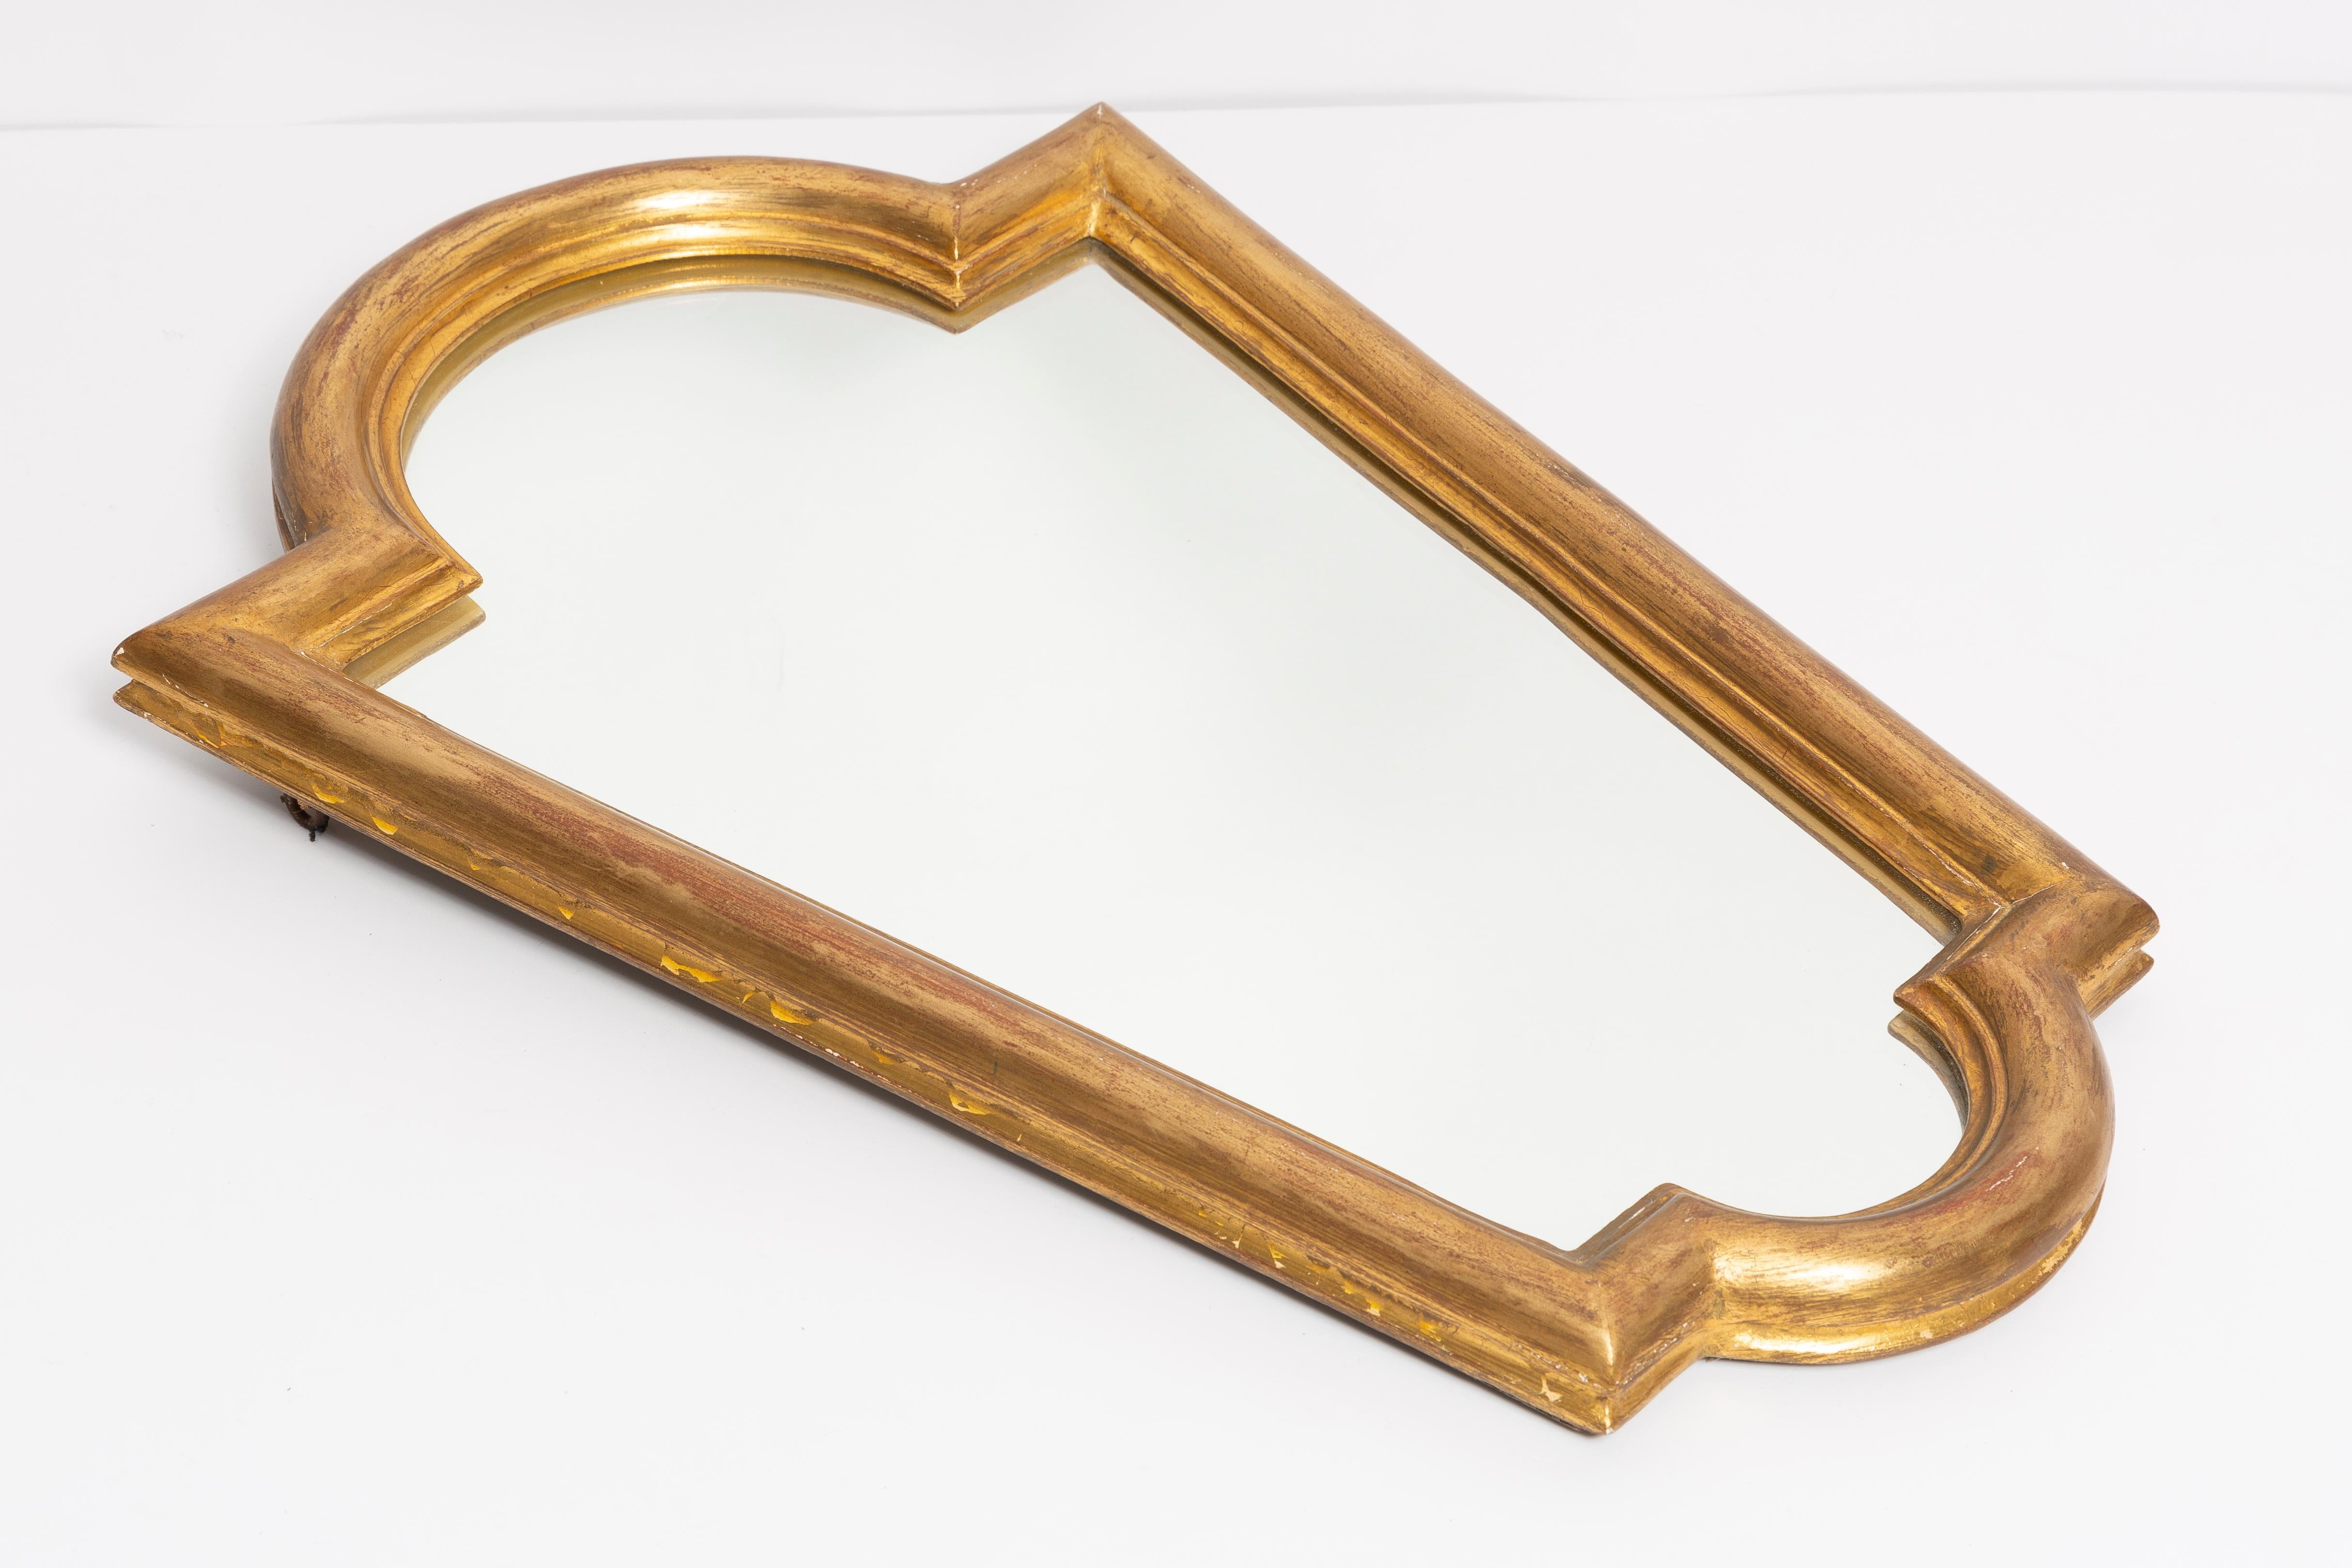 A medium mirror in a golden decorative frame from Italy. The frame is made of wood. Mirror is in very good vintage condition, no damage or cracks in the frame. Original glass. Beautiful piece for every interior! Only one unique piece.